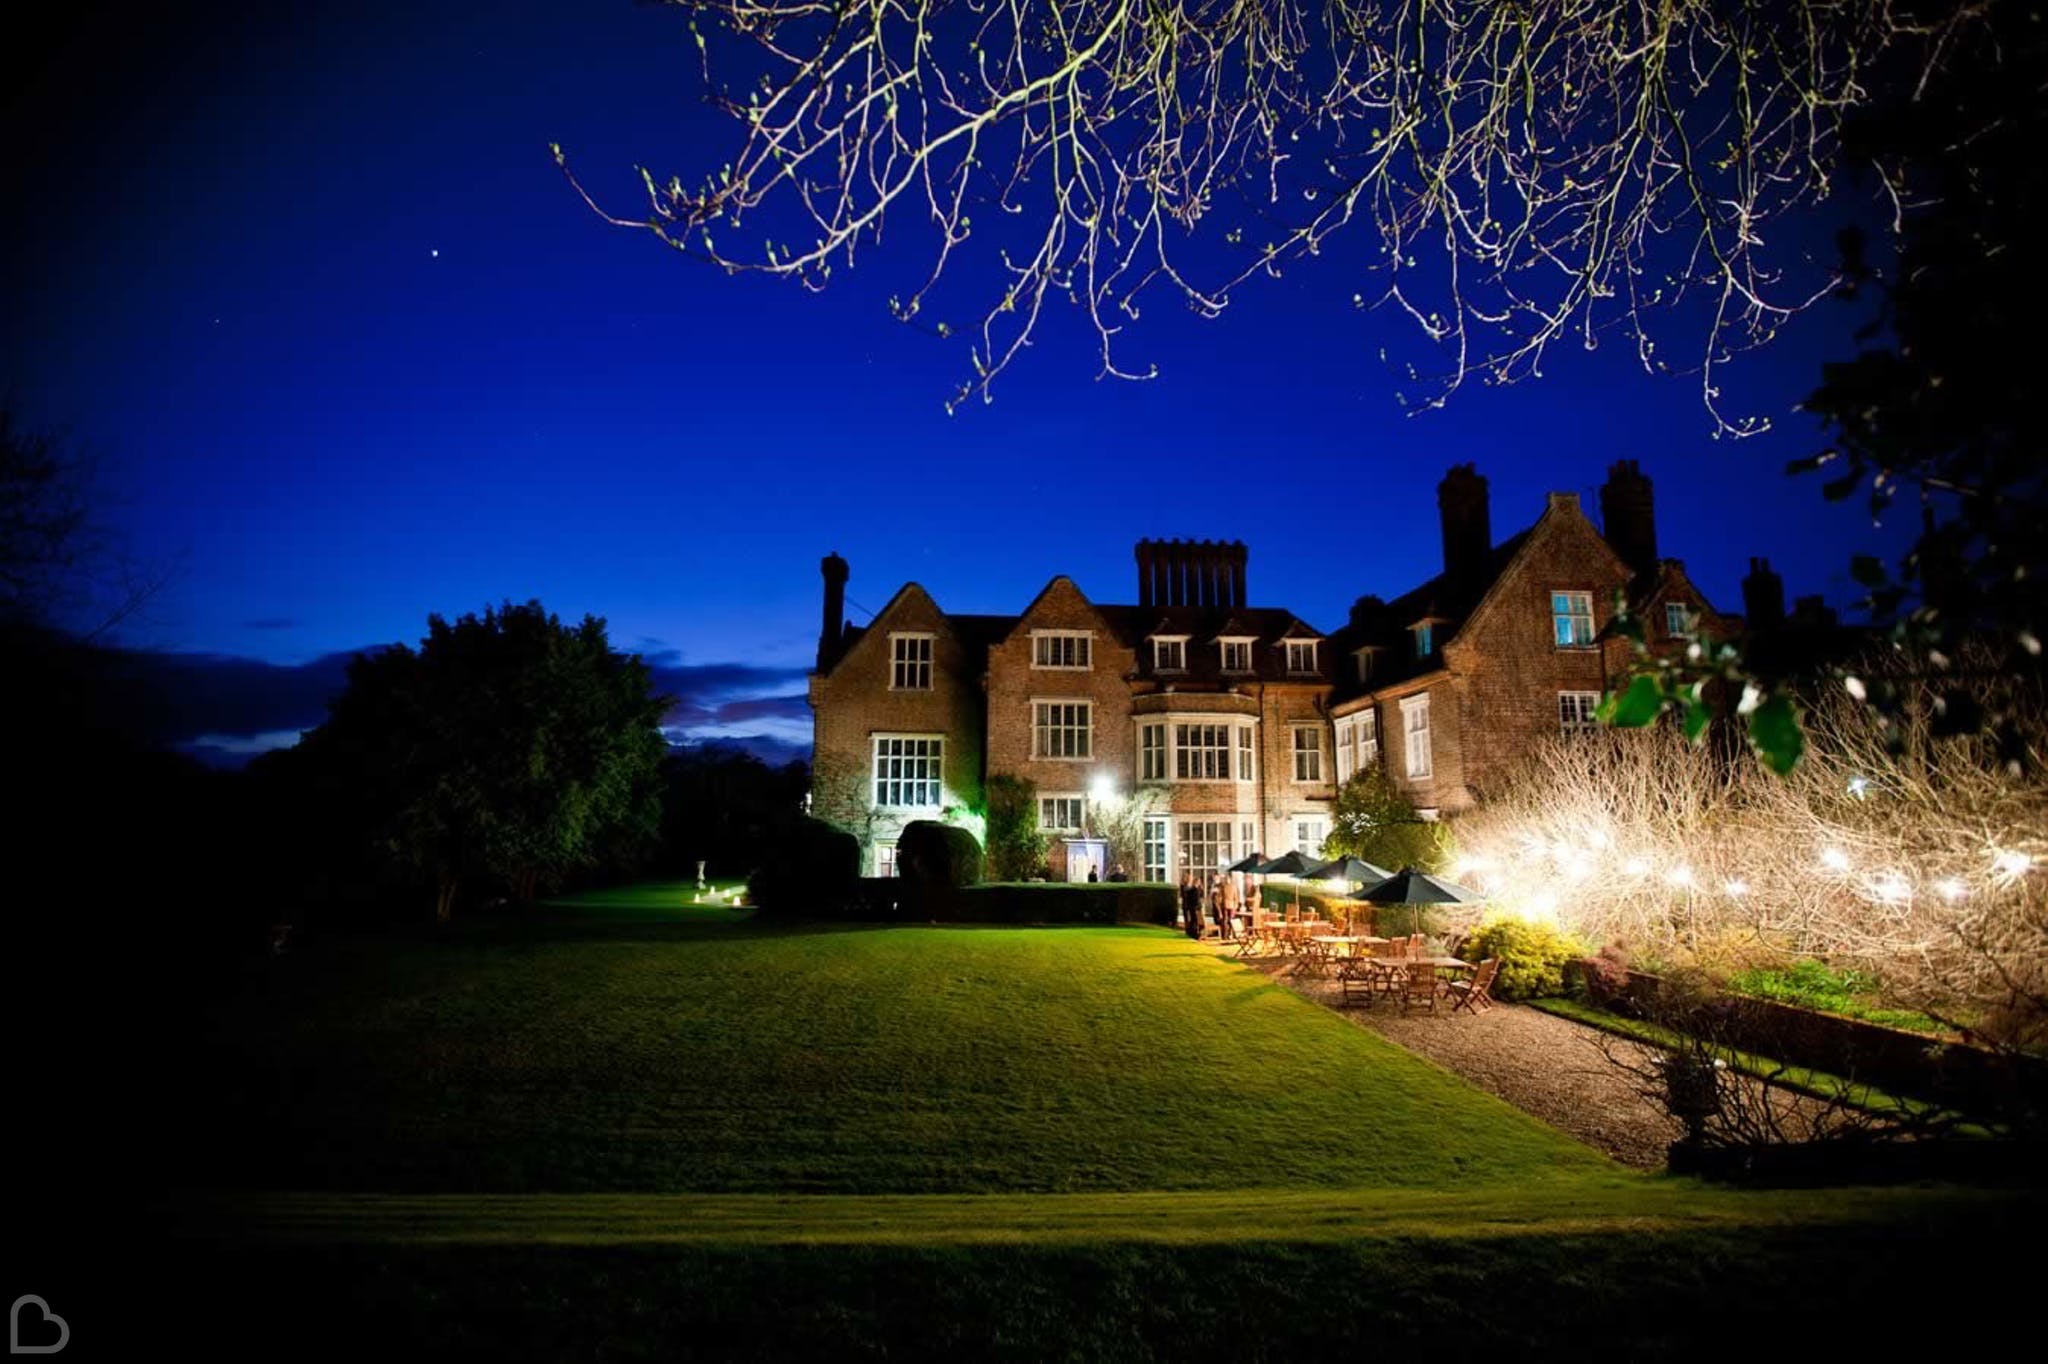 knowlton court at night